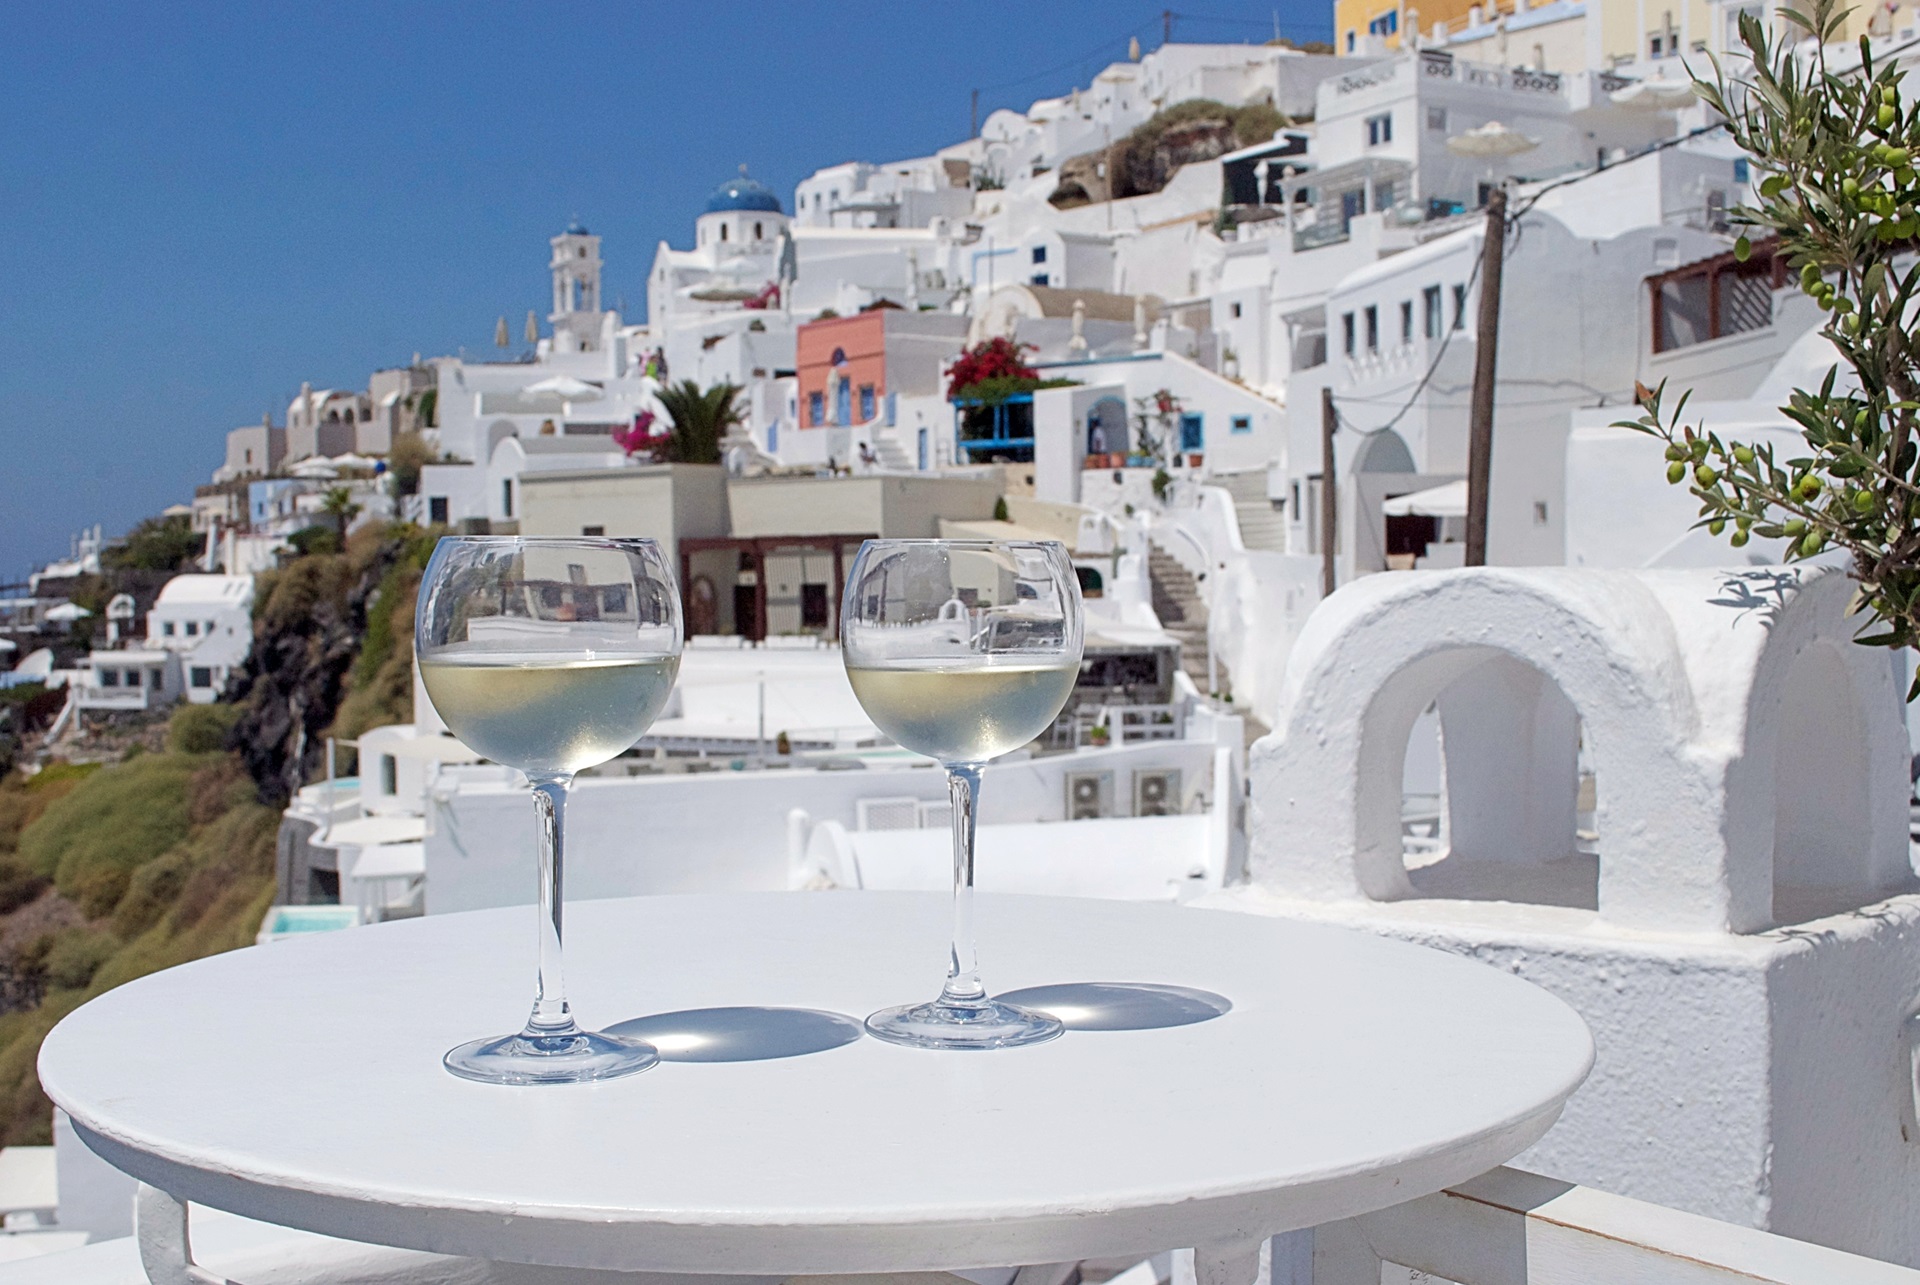 santorini and wine. An unrelated relationship!